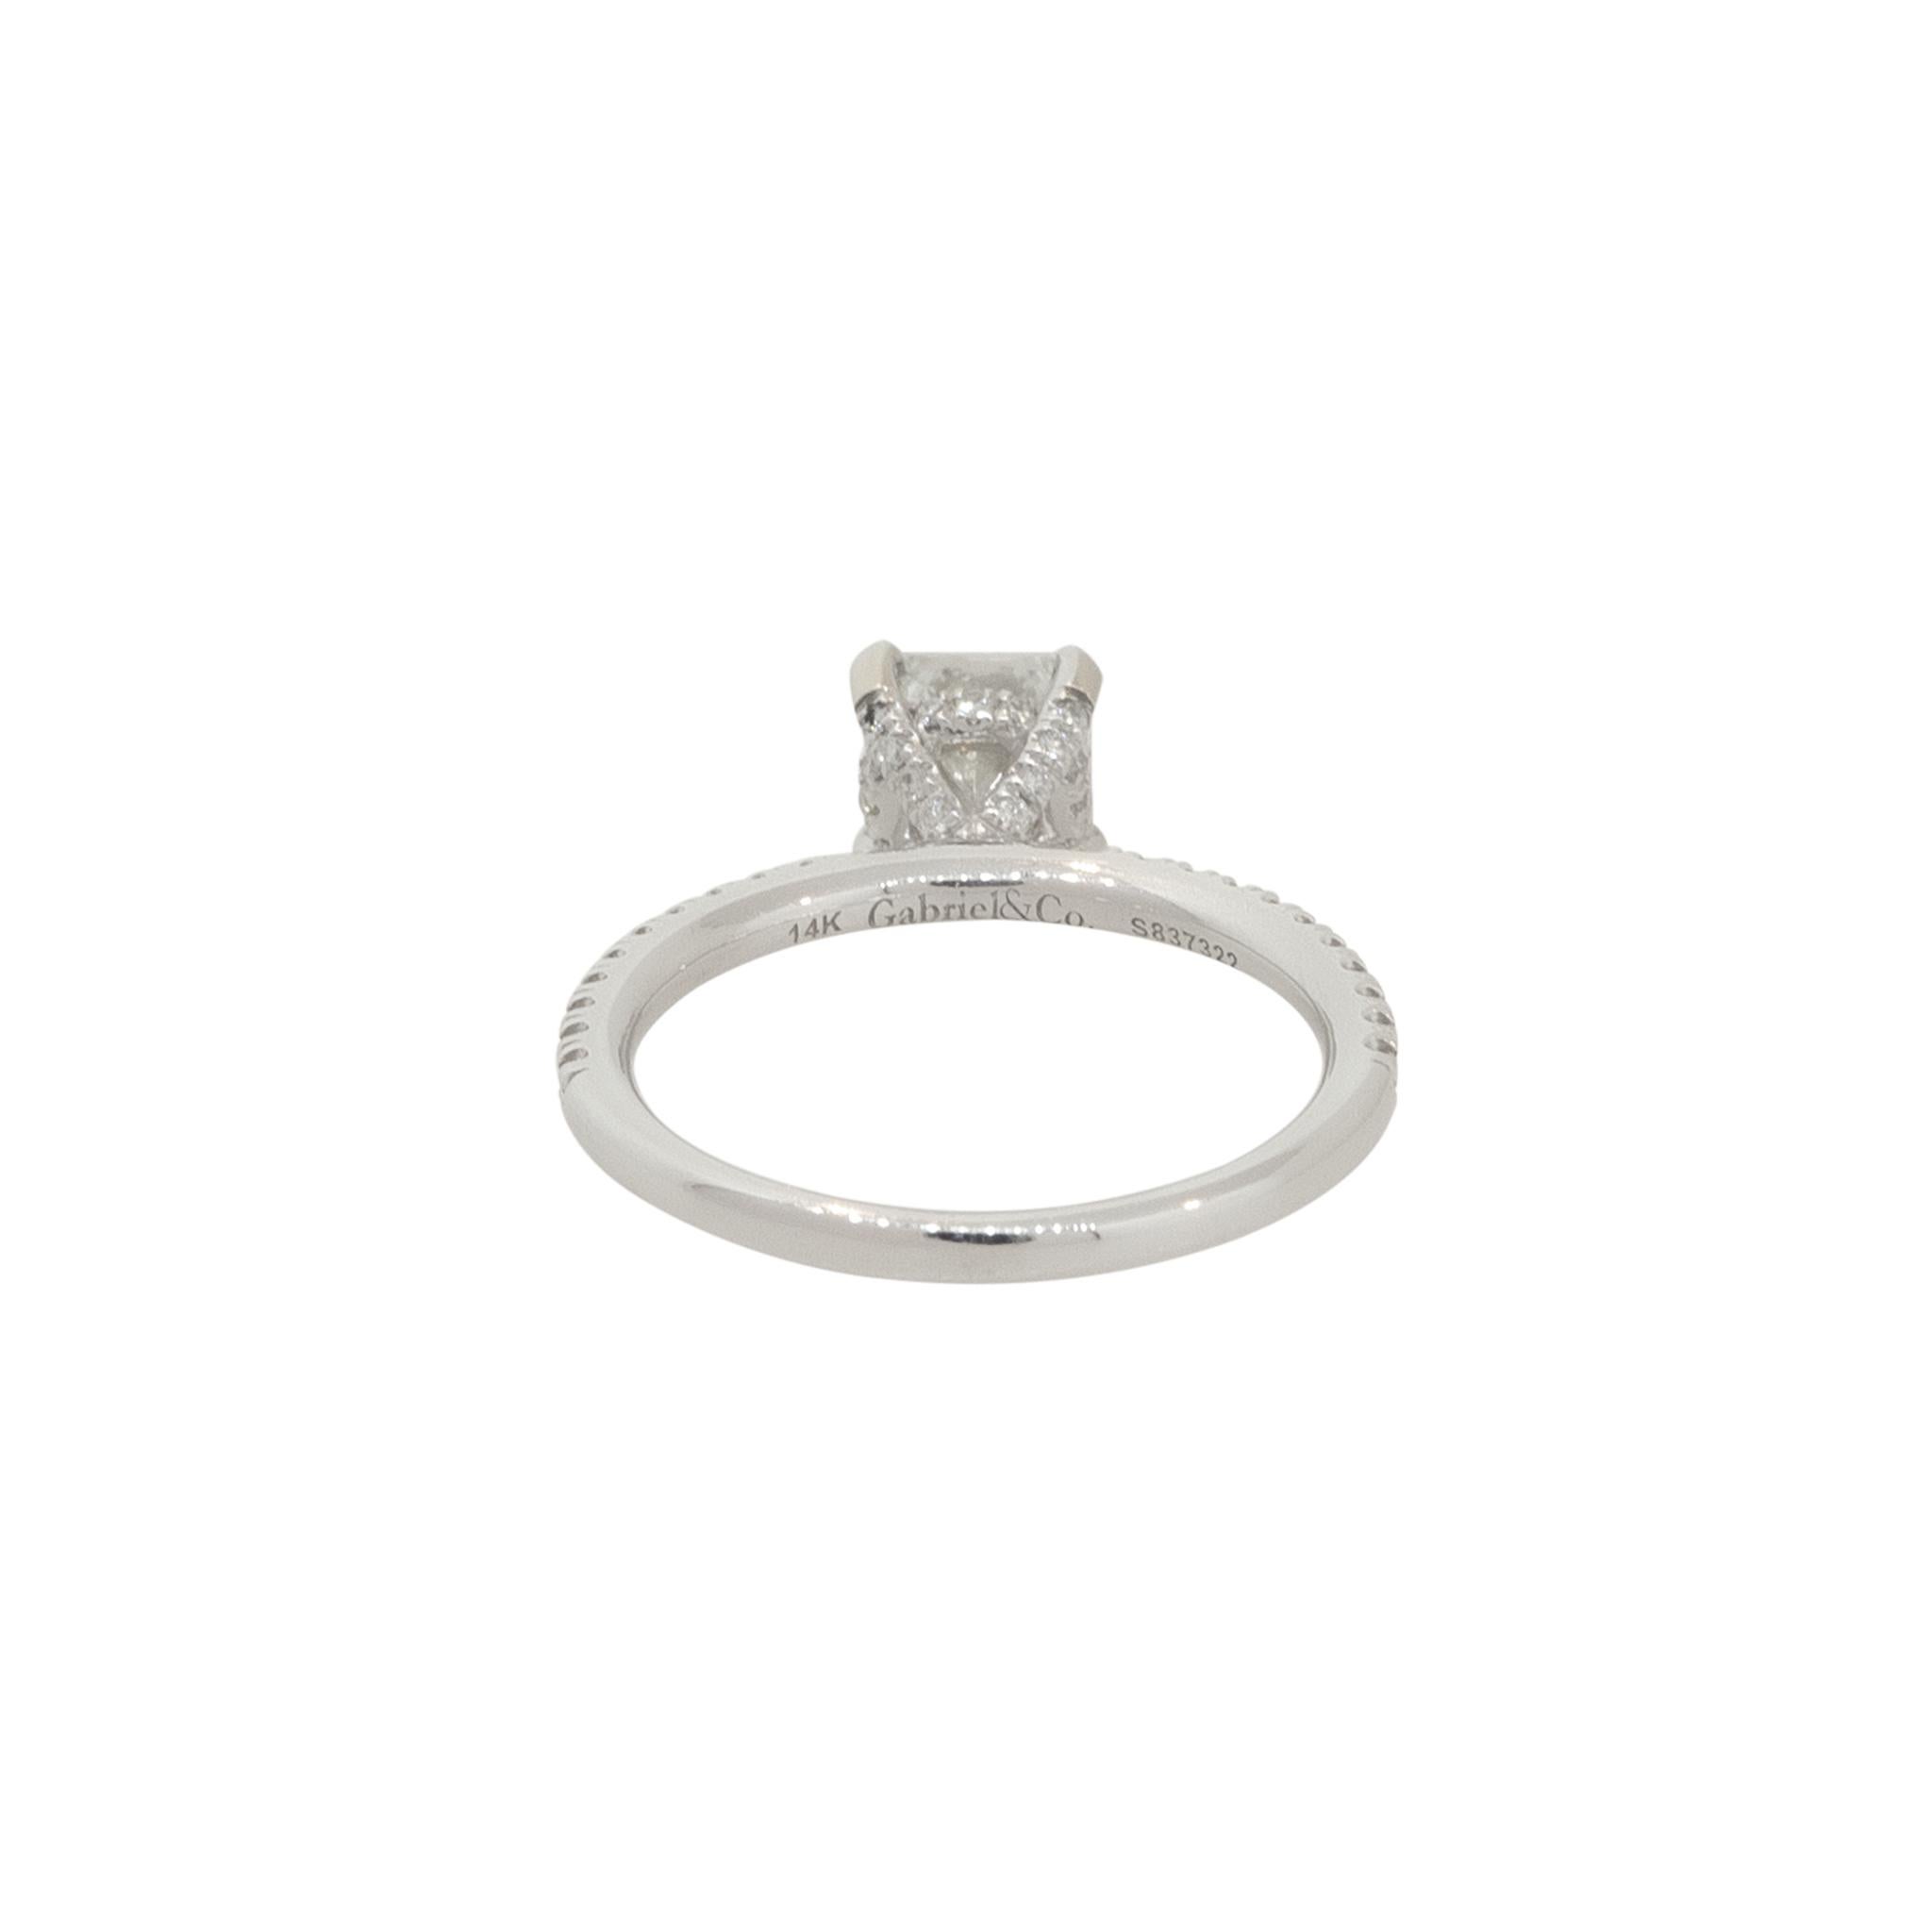 GIA Certified 14k White Gold 1.32ctw Radiant Cut Diamond Engagement Ring

Raymond Lee Jewelers in Boca Raton -- South Florida’s destination for diamonds, fine jewelry, antique jewelry, estate pieces, and vintage jewels.

Style: Women's 4 Prong